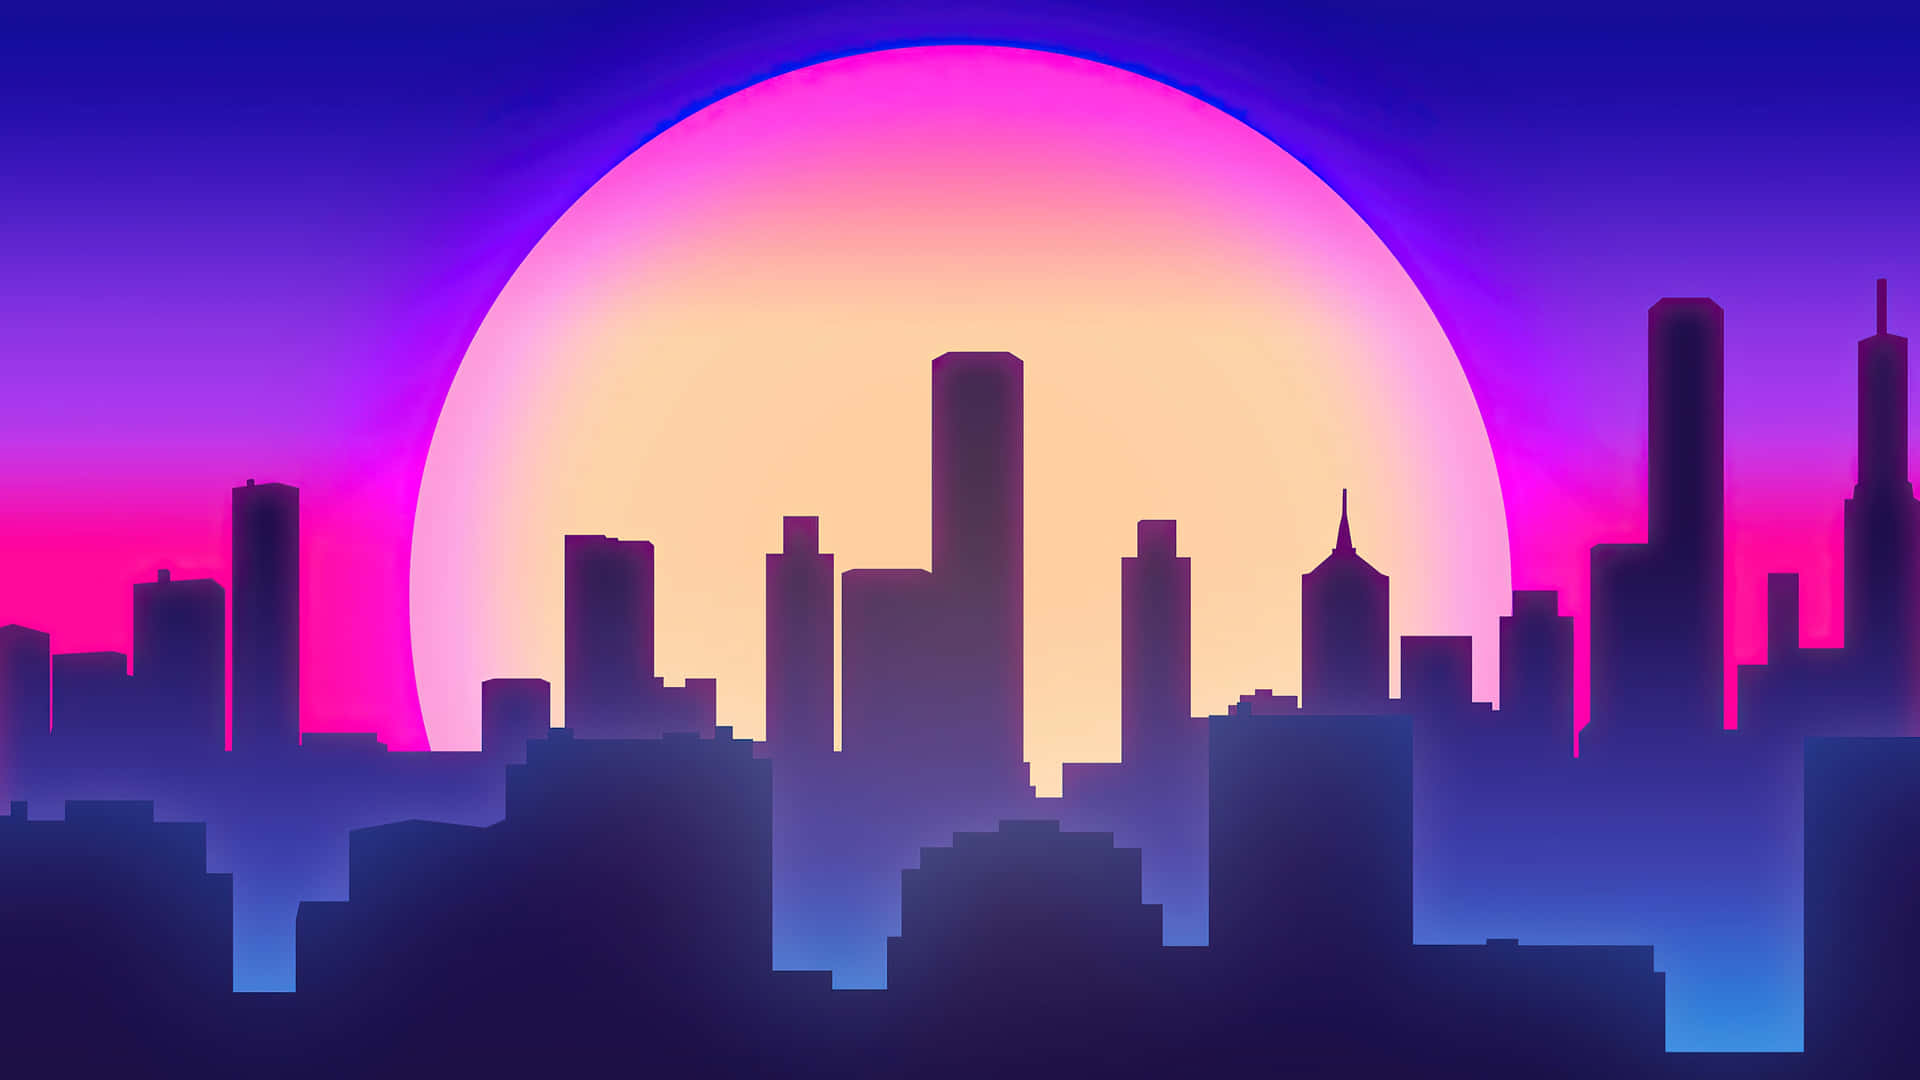 Encounter the neon paradise of Synthwave City, where the future truly begins! Wallpaper